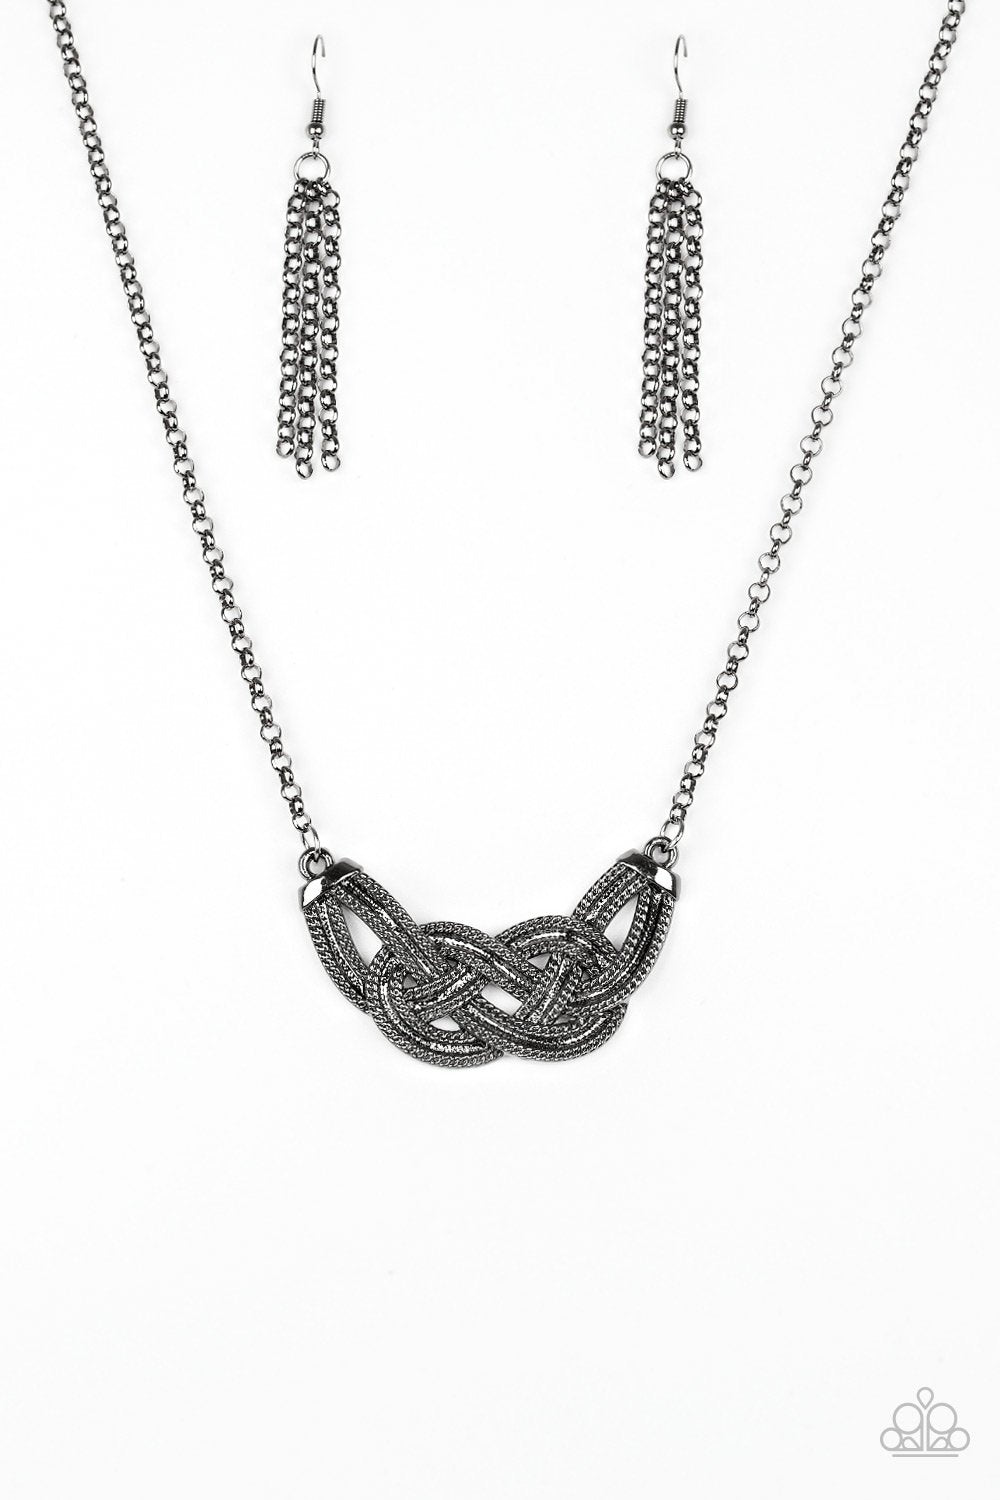 Nautically Naples Black Gunmetal Necklace and matching Earrings - Paparazzi Accessories-CarasShop.com - $5 Jewelry by Cara Jewels